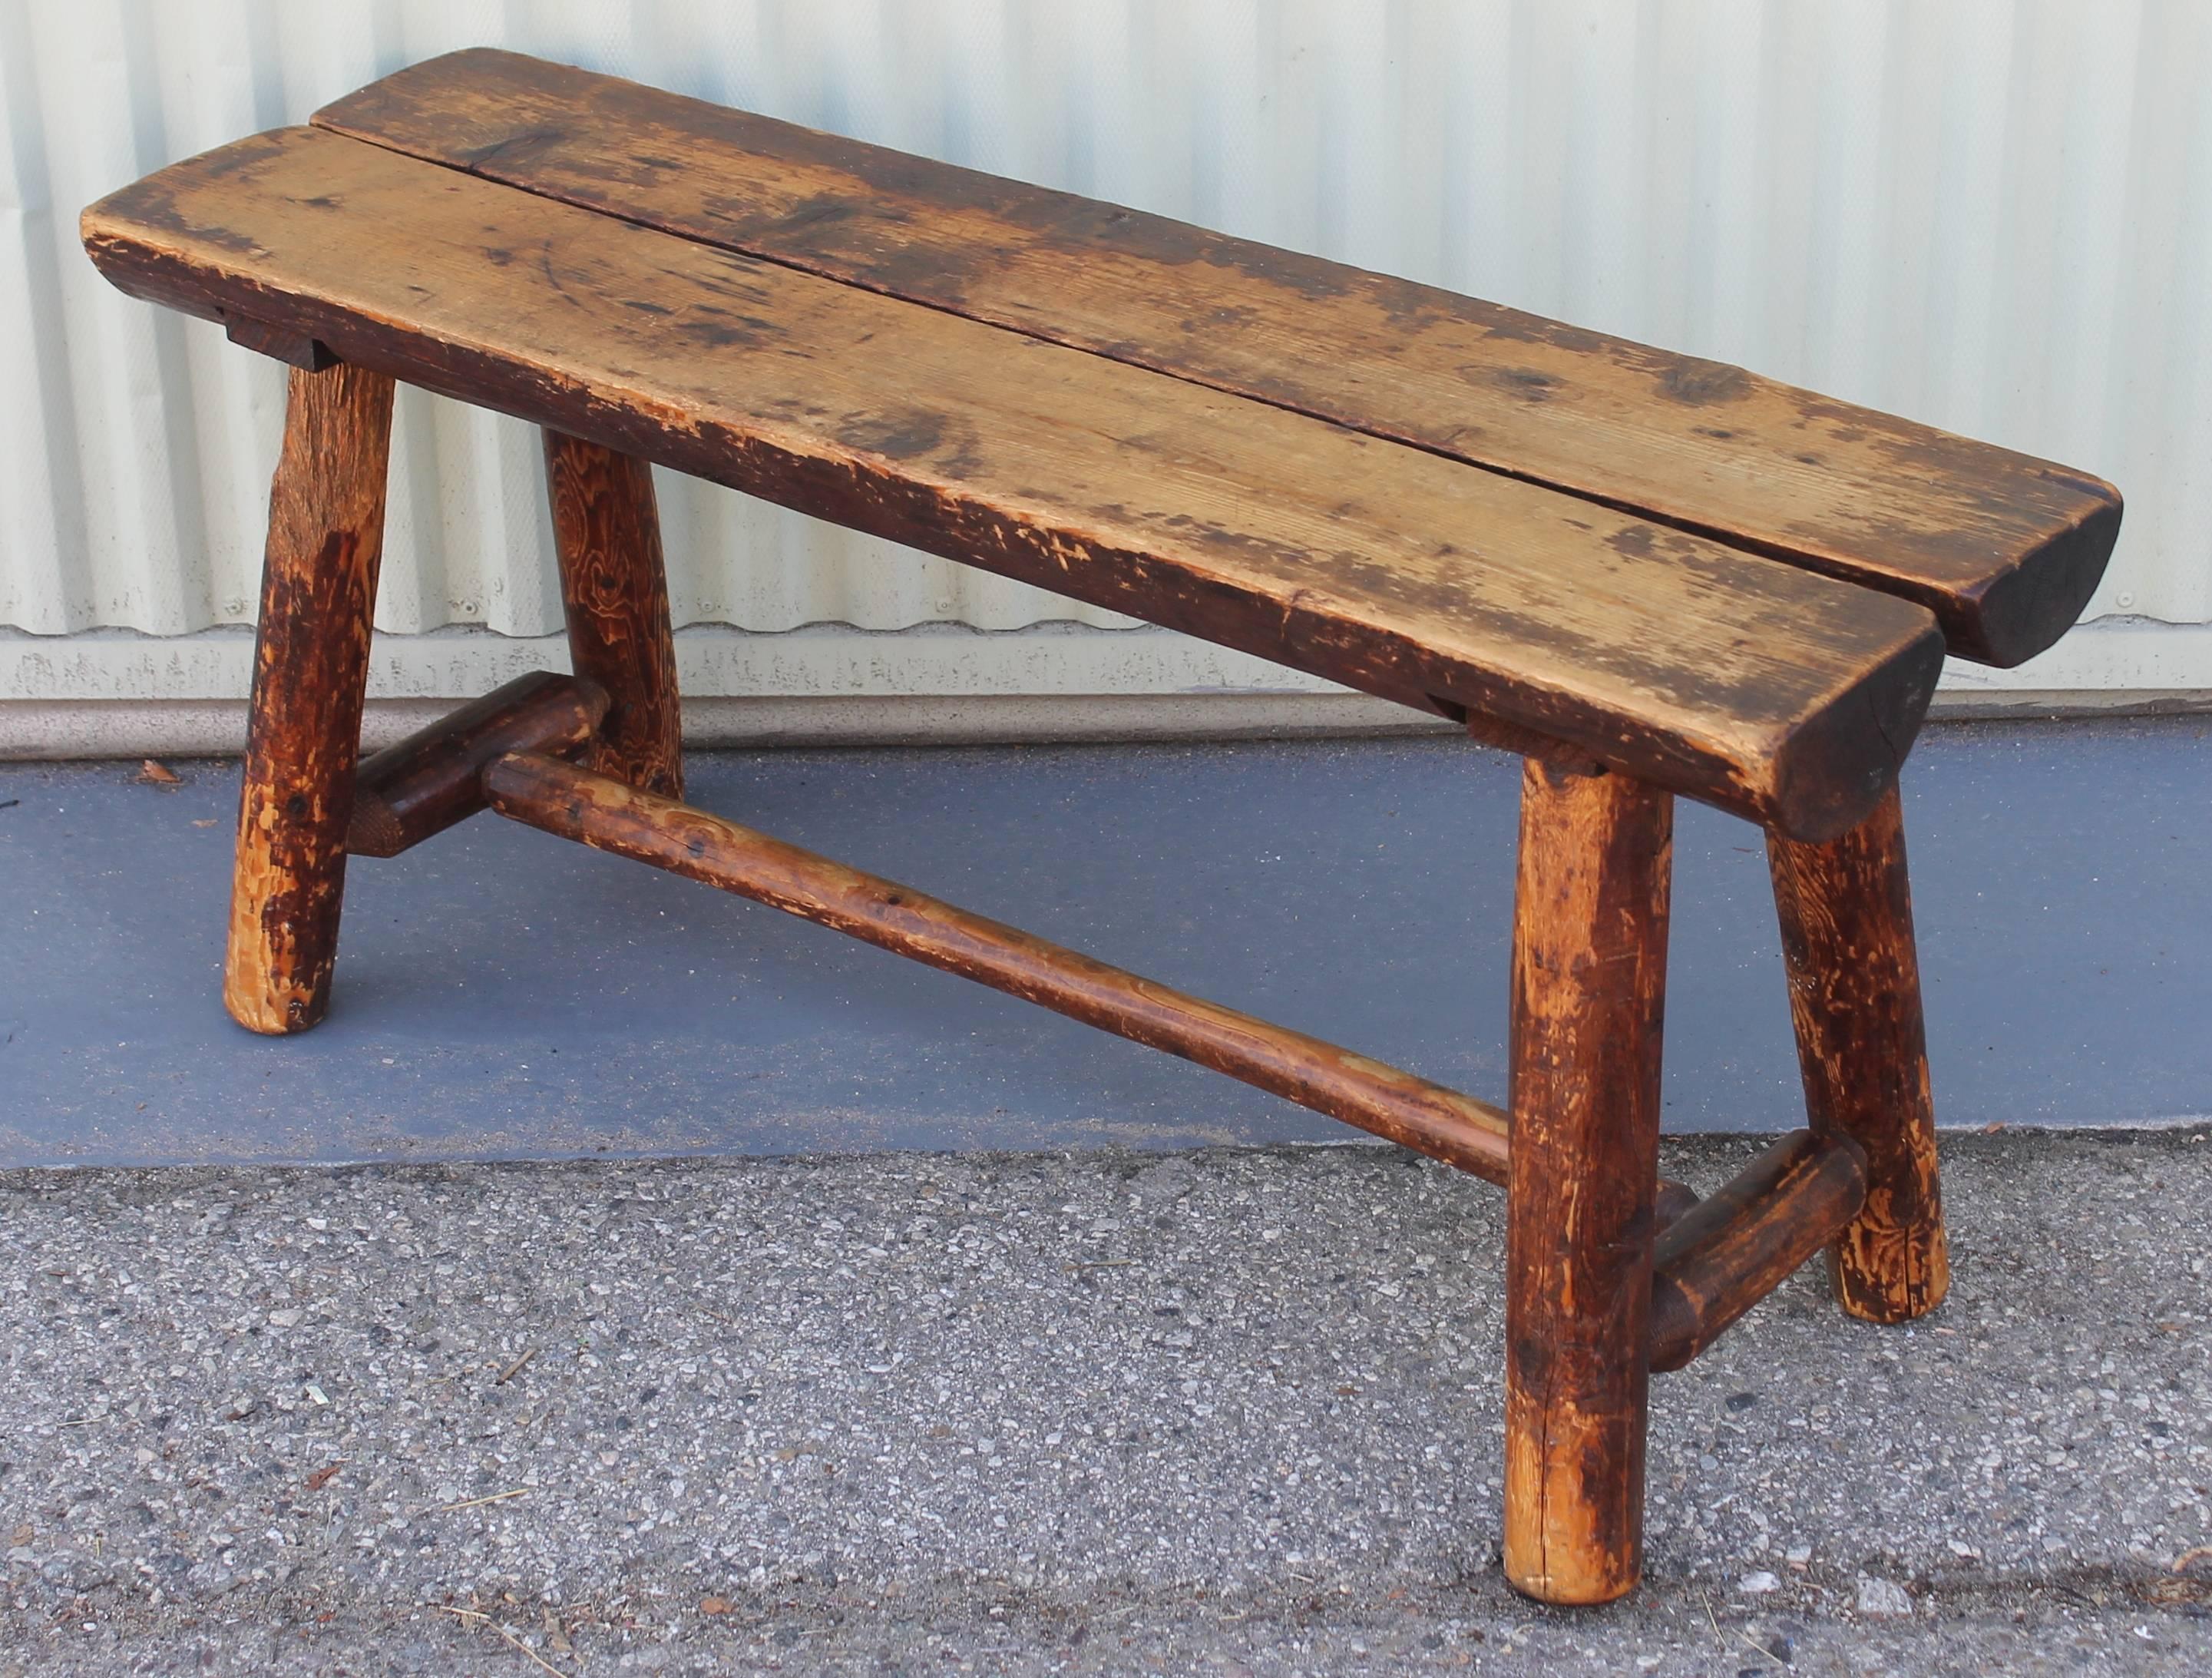 This fine worn bench / table was found in Pennsylvania and is in great sturdy condition. It has a wonderful mellow patina with a undisturbed surface. This bench or table is great at the end of a bed or as a small coffee table. Great rustic cabin